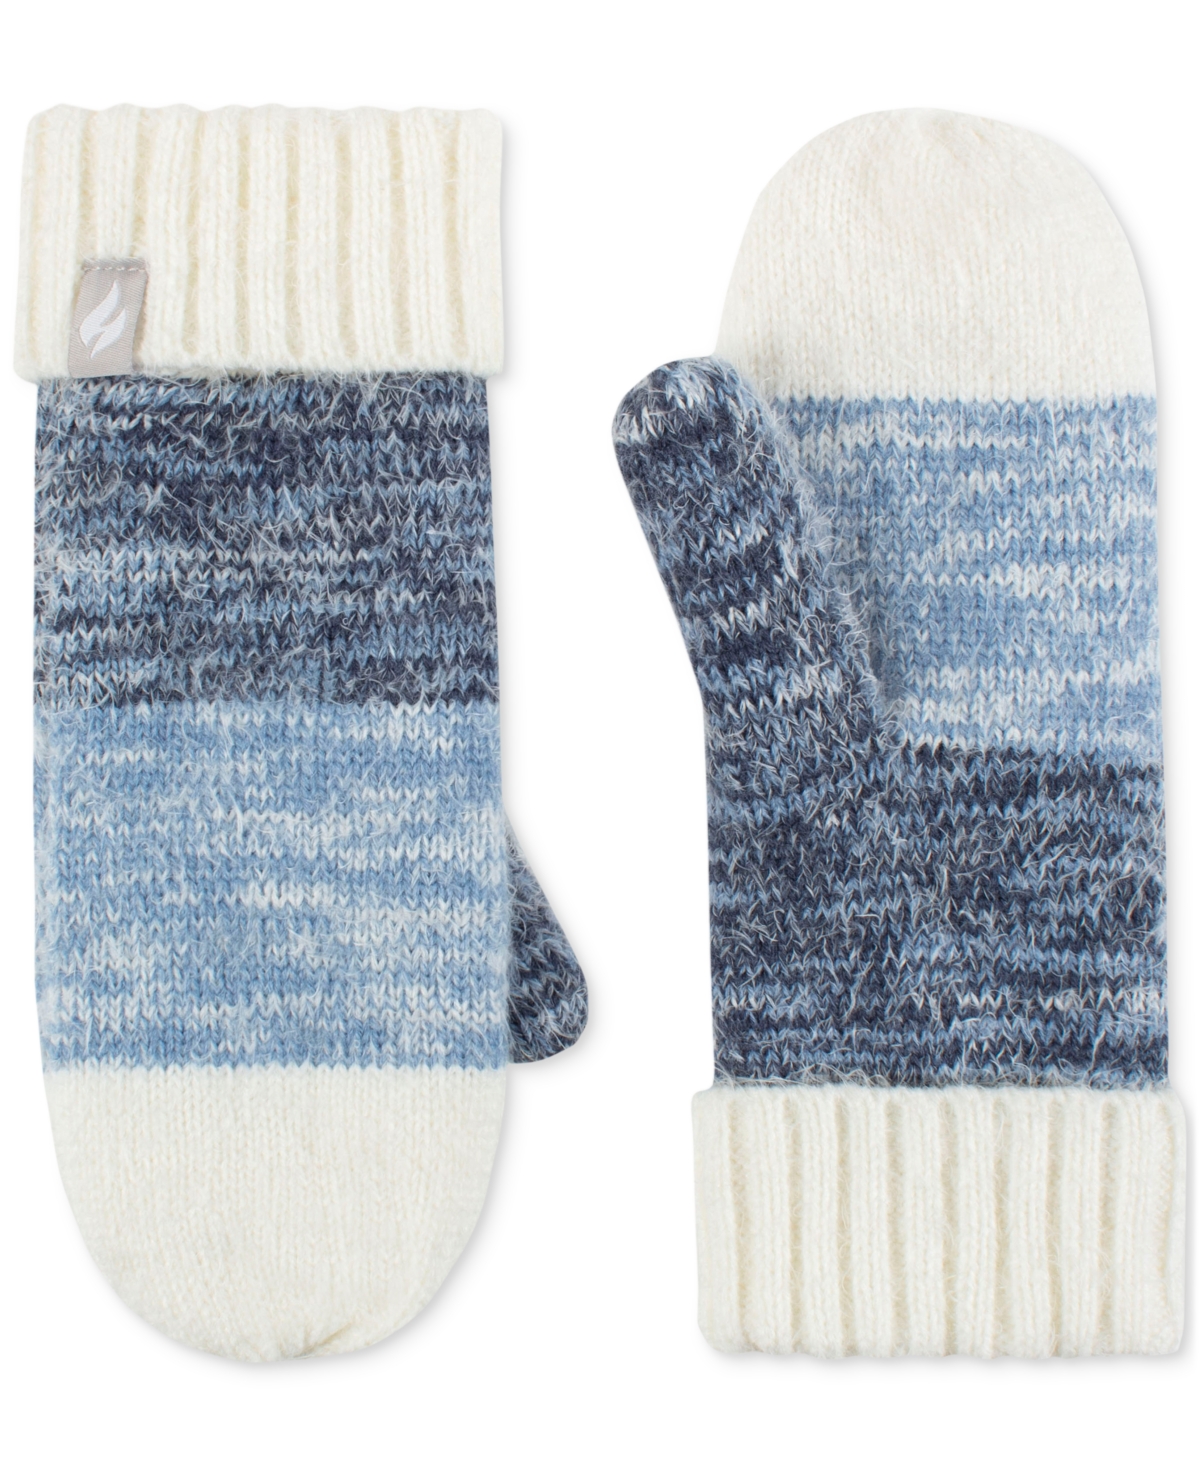 Sloane Feather Knit Mittens - Navy